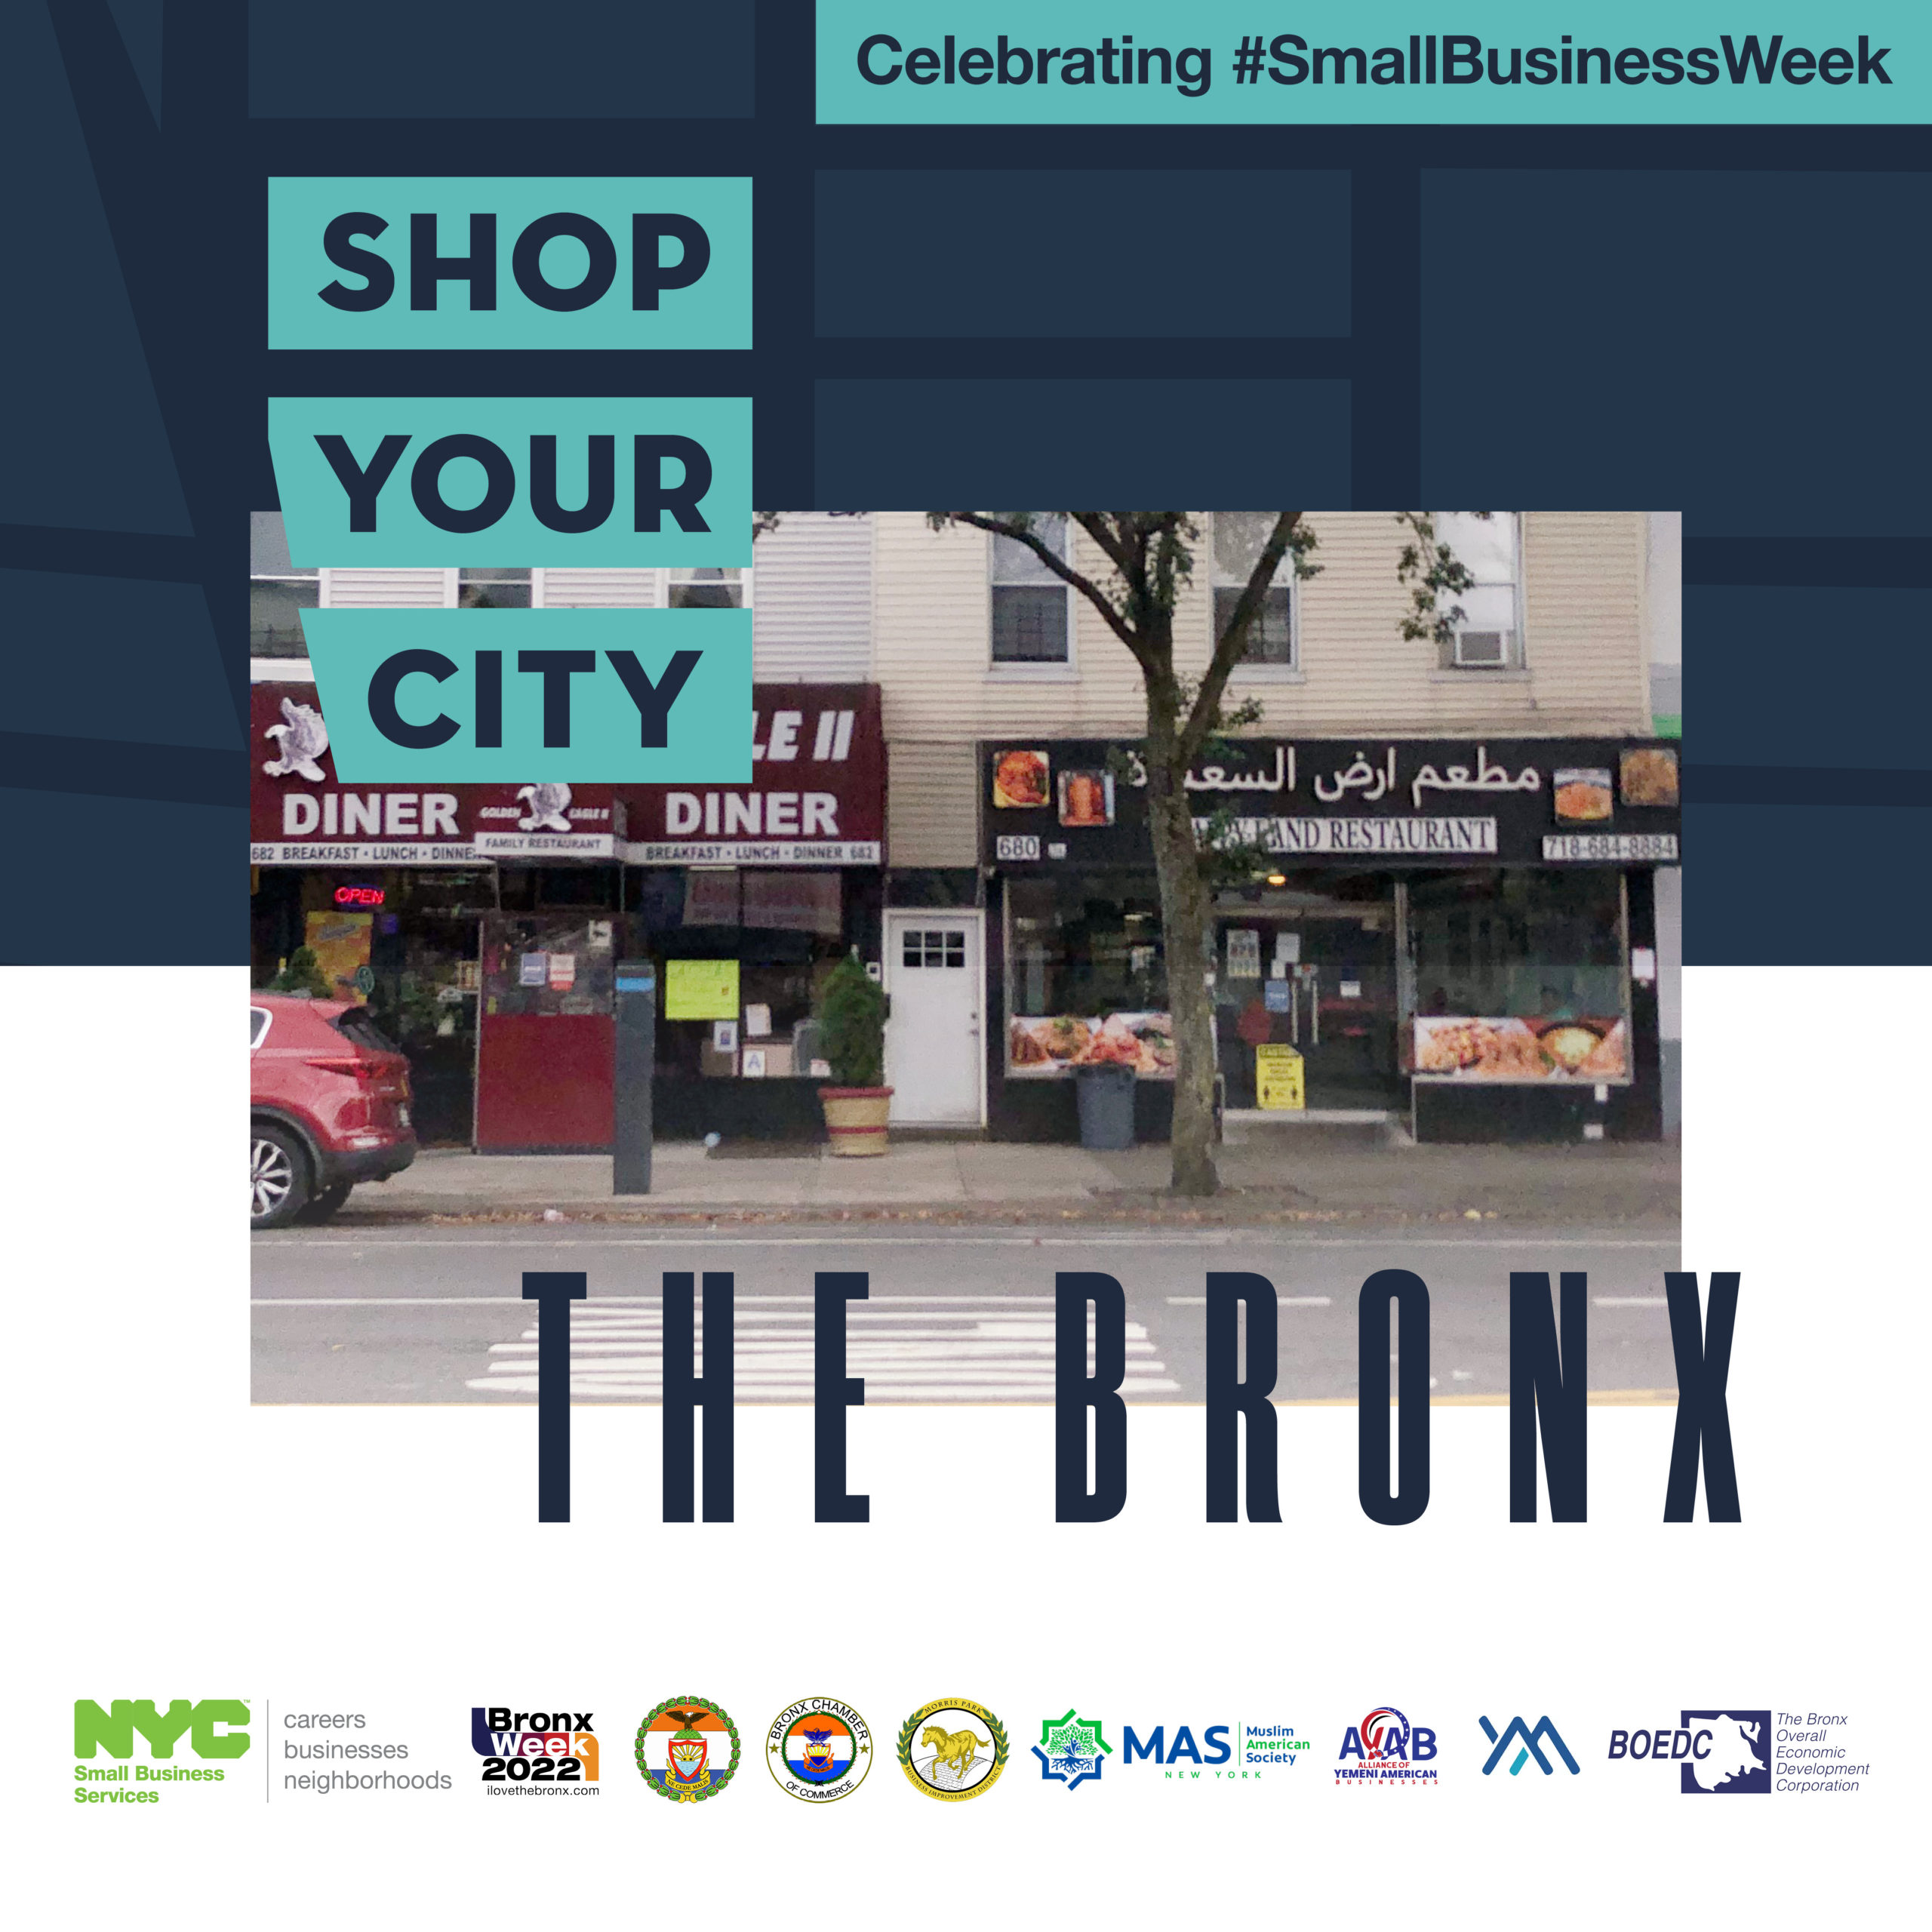 Commercial corridor on Morris Park Avenue in the Bronx with Shop Your City Bronx text and SBS and partner logos